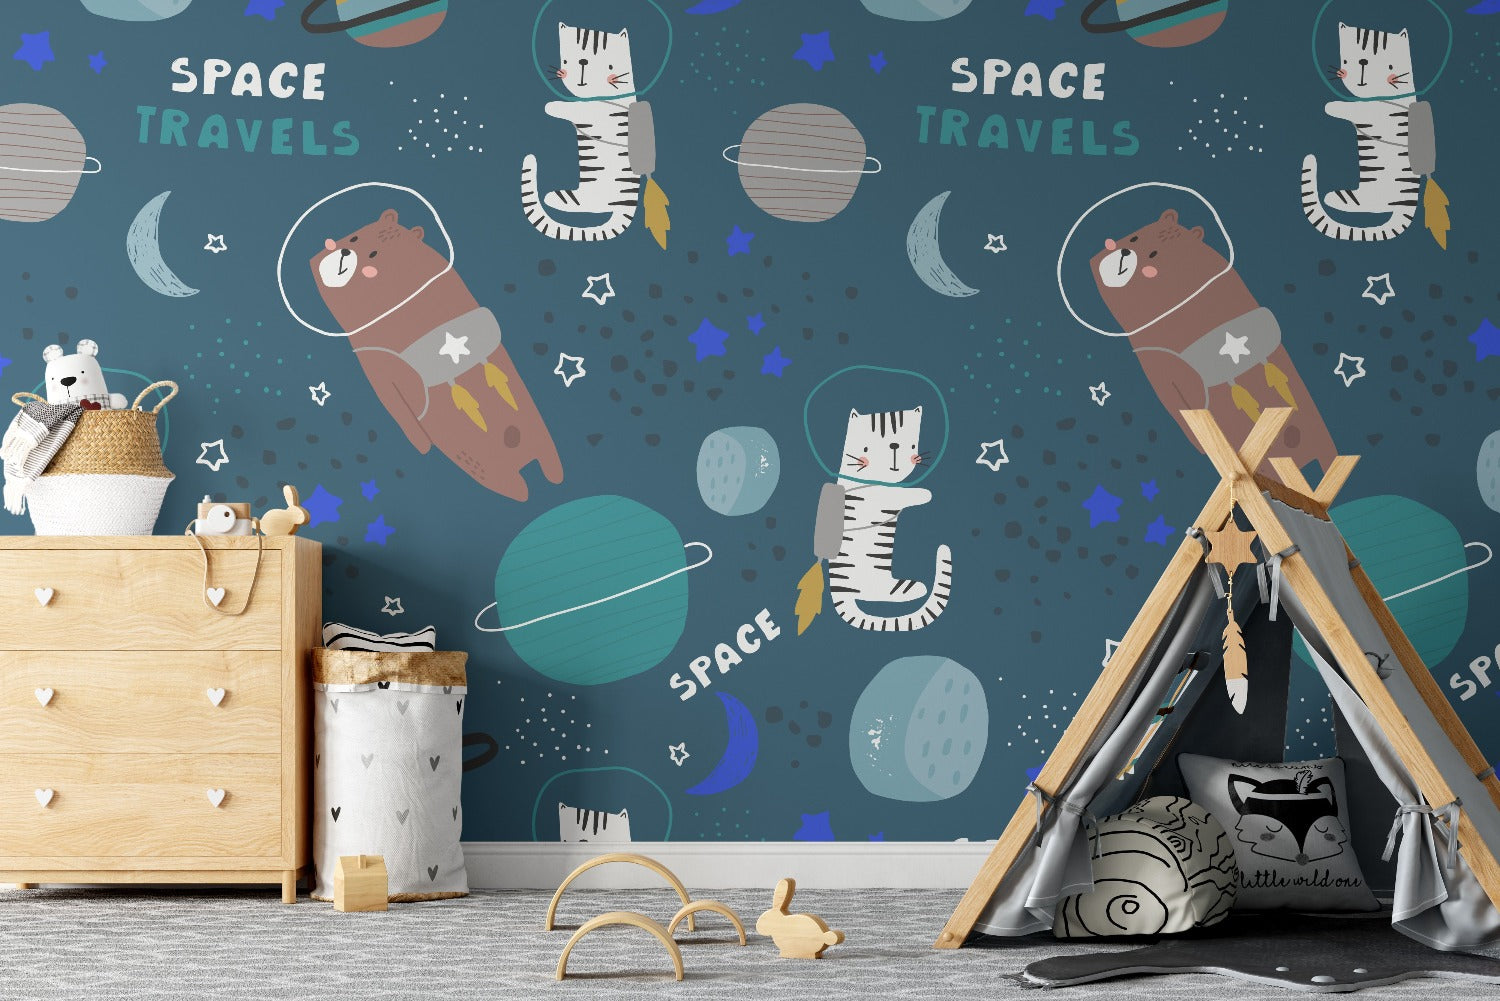 A lively room decorated with the same children's space-themed wallpaper. The walls feature adorable cats and bears in astronaut suits floating among planets and stars. The room is furnished with a wooden dresser, a cozy teepee, and playful decor, creating an adventurous and imaginative space.